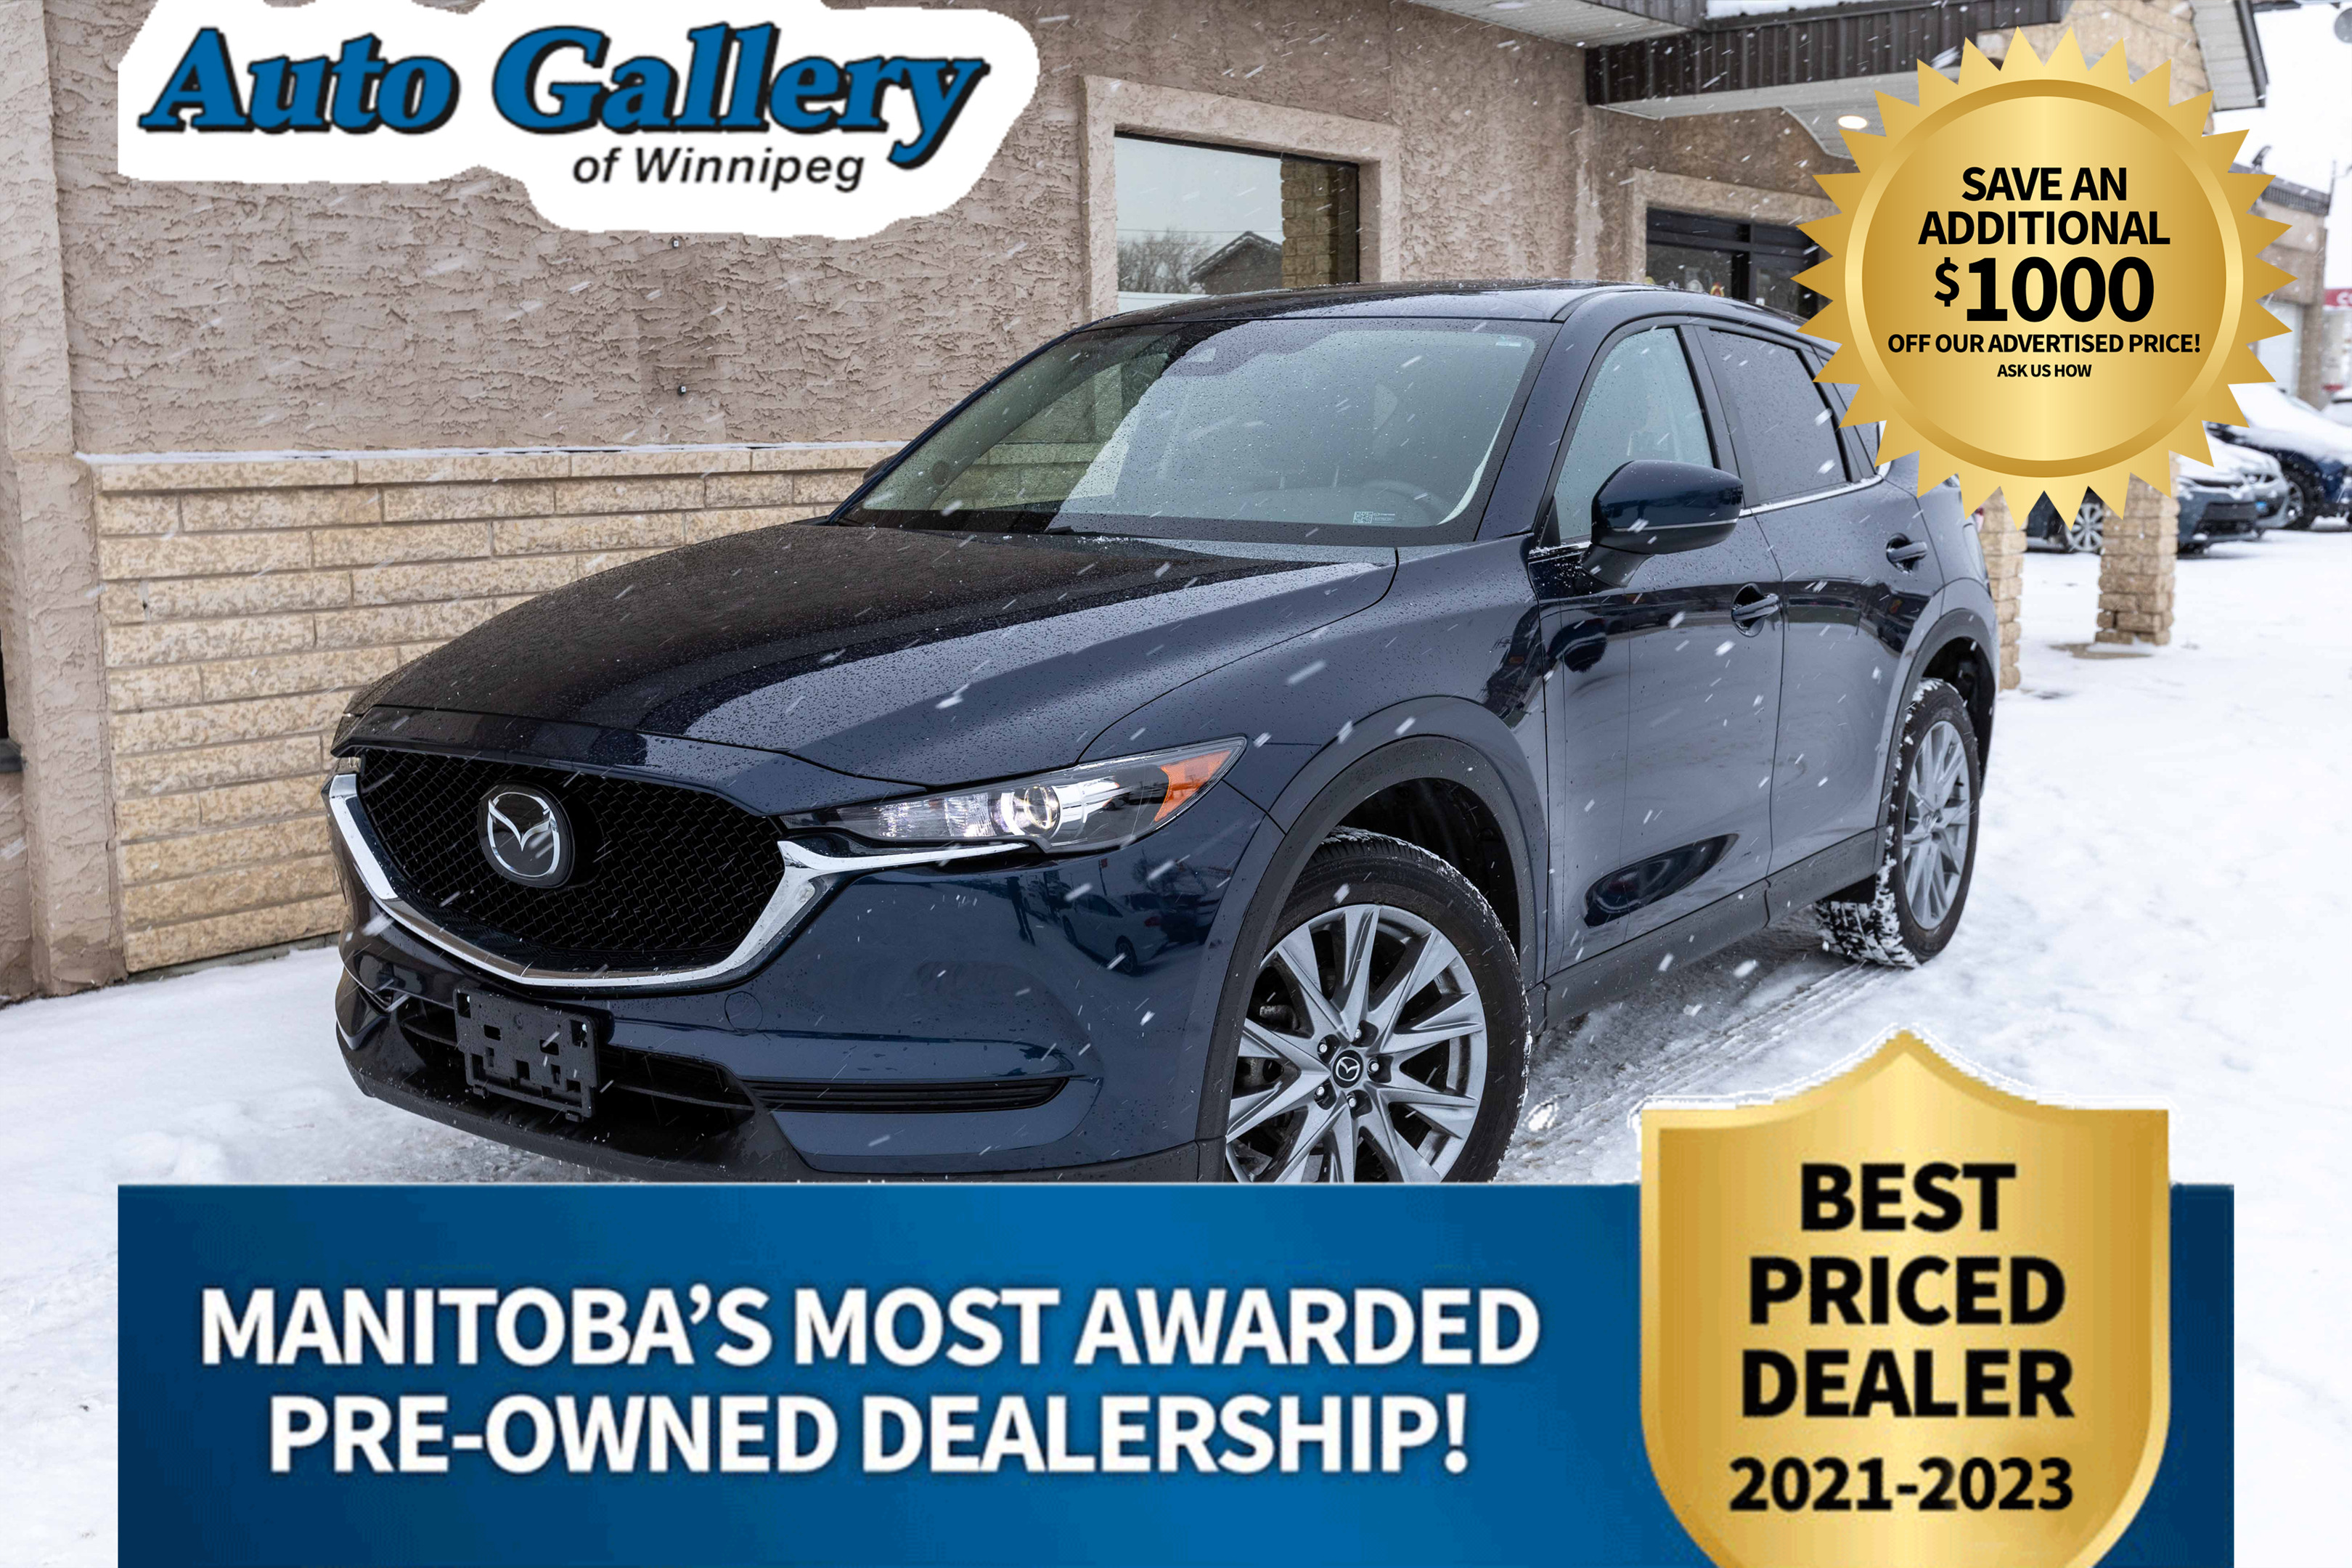 2021 Mazda CX-5 TOURING, ROOF, HTD SEATS/WHEEL, PWR HATCH, LOADED